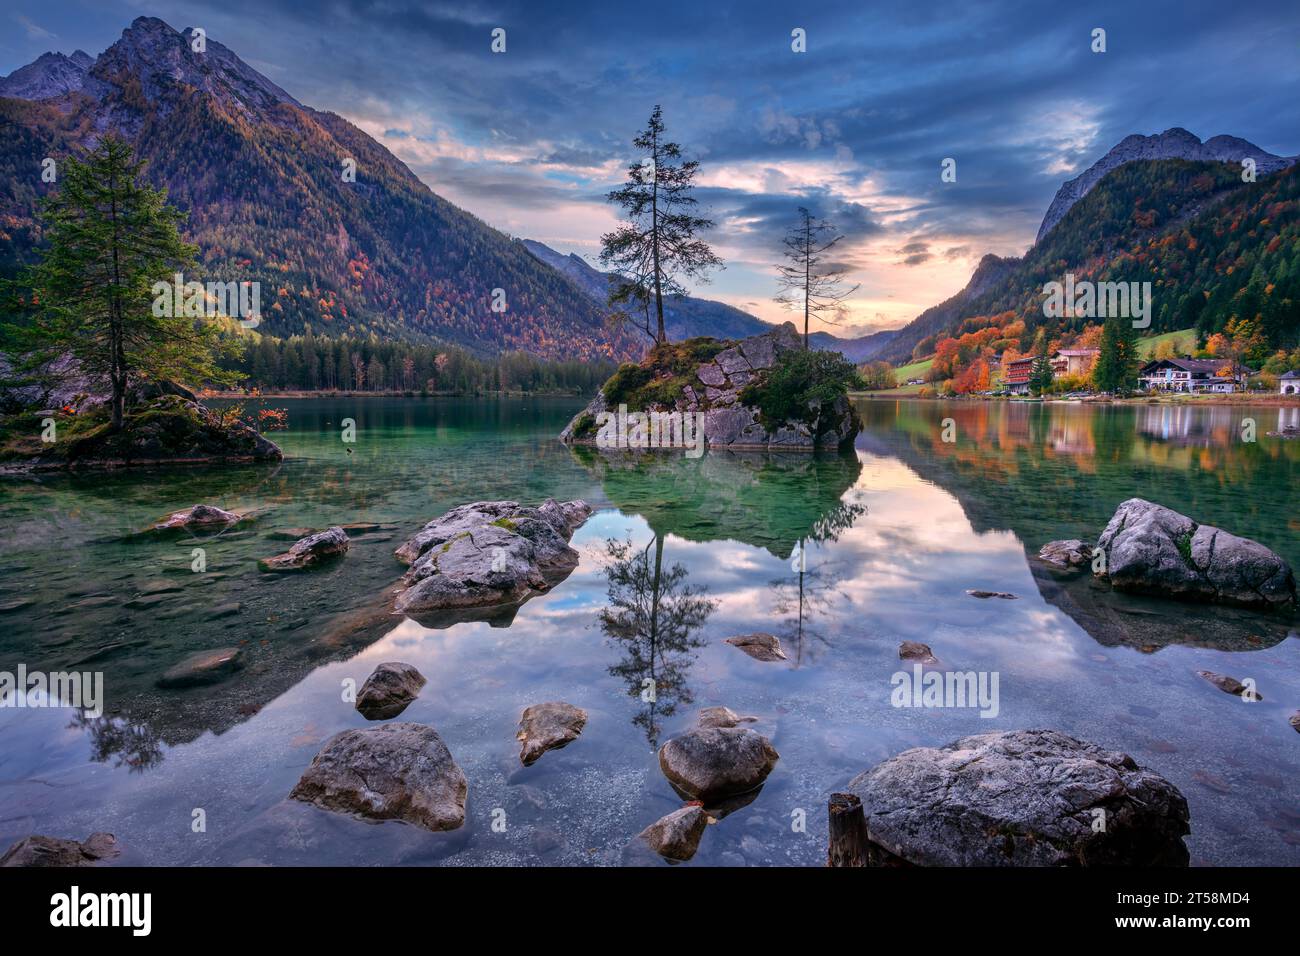 Hintersee Lake, Bavarian Alps, Germany. Landscape image of Hintersee Lake located in southern Bavaria, Germany at beautiful autumn sunset. Stock Photo